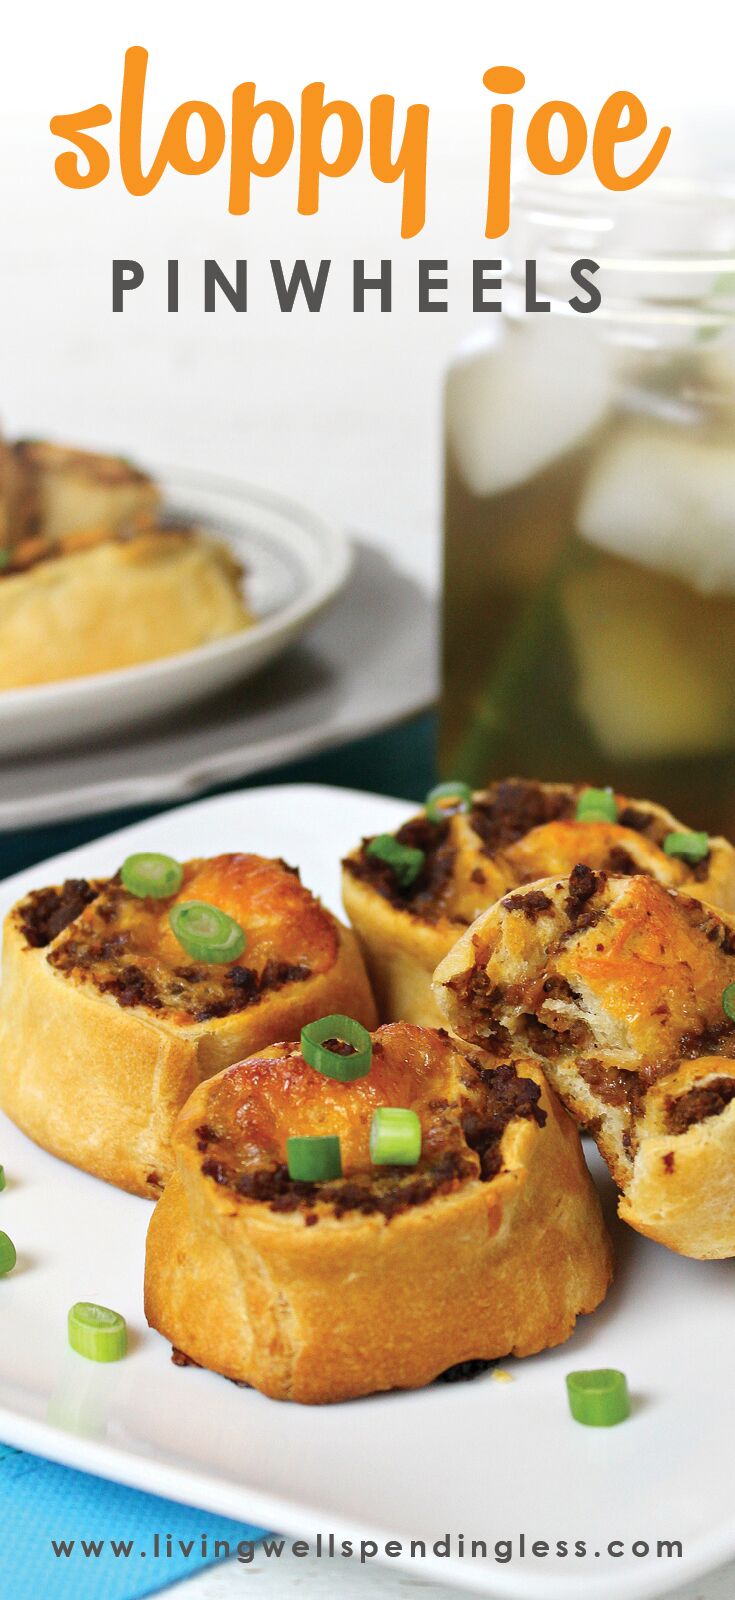 Bored with the same old dinners? These delicious Sloppy Joe Pinwheels come together in less than 30 minutes for a meal your whole family will love!